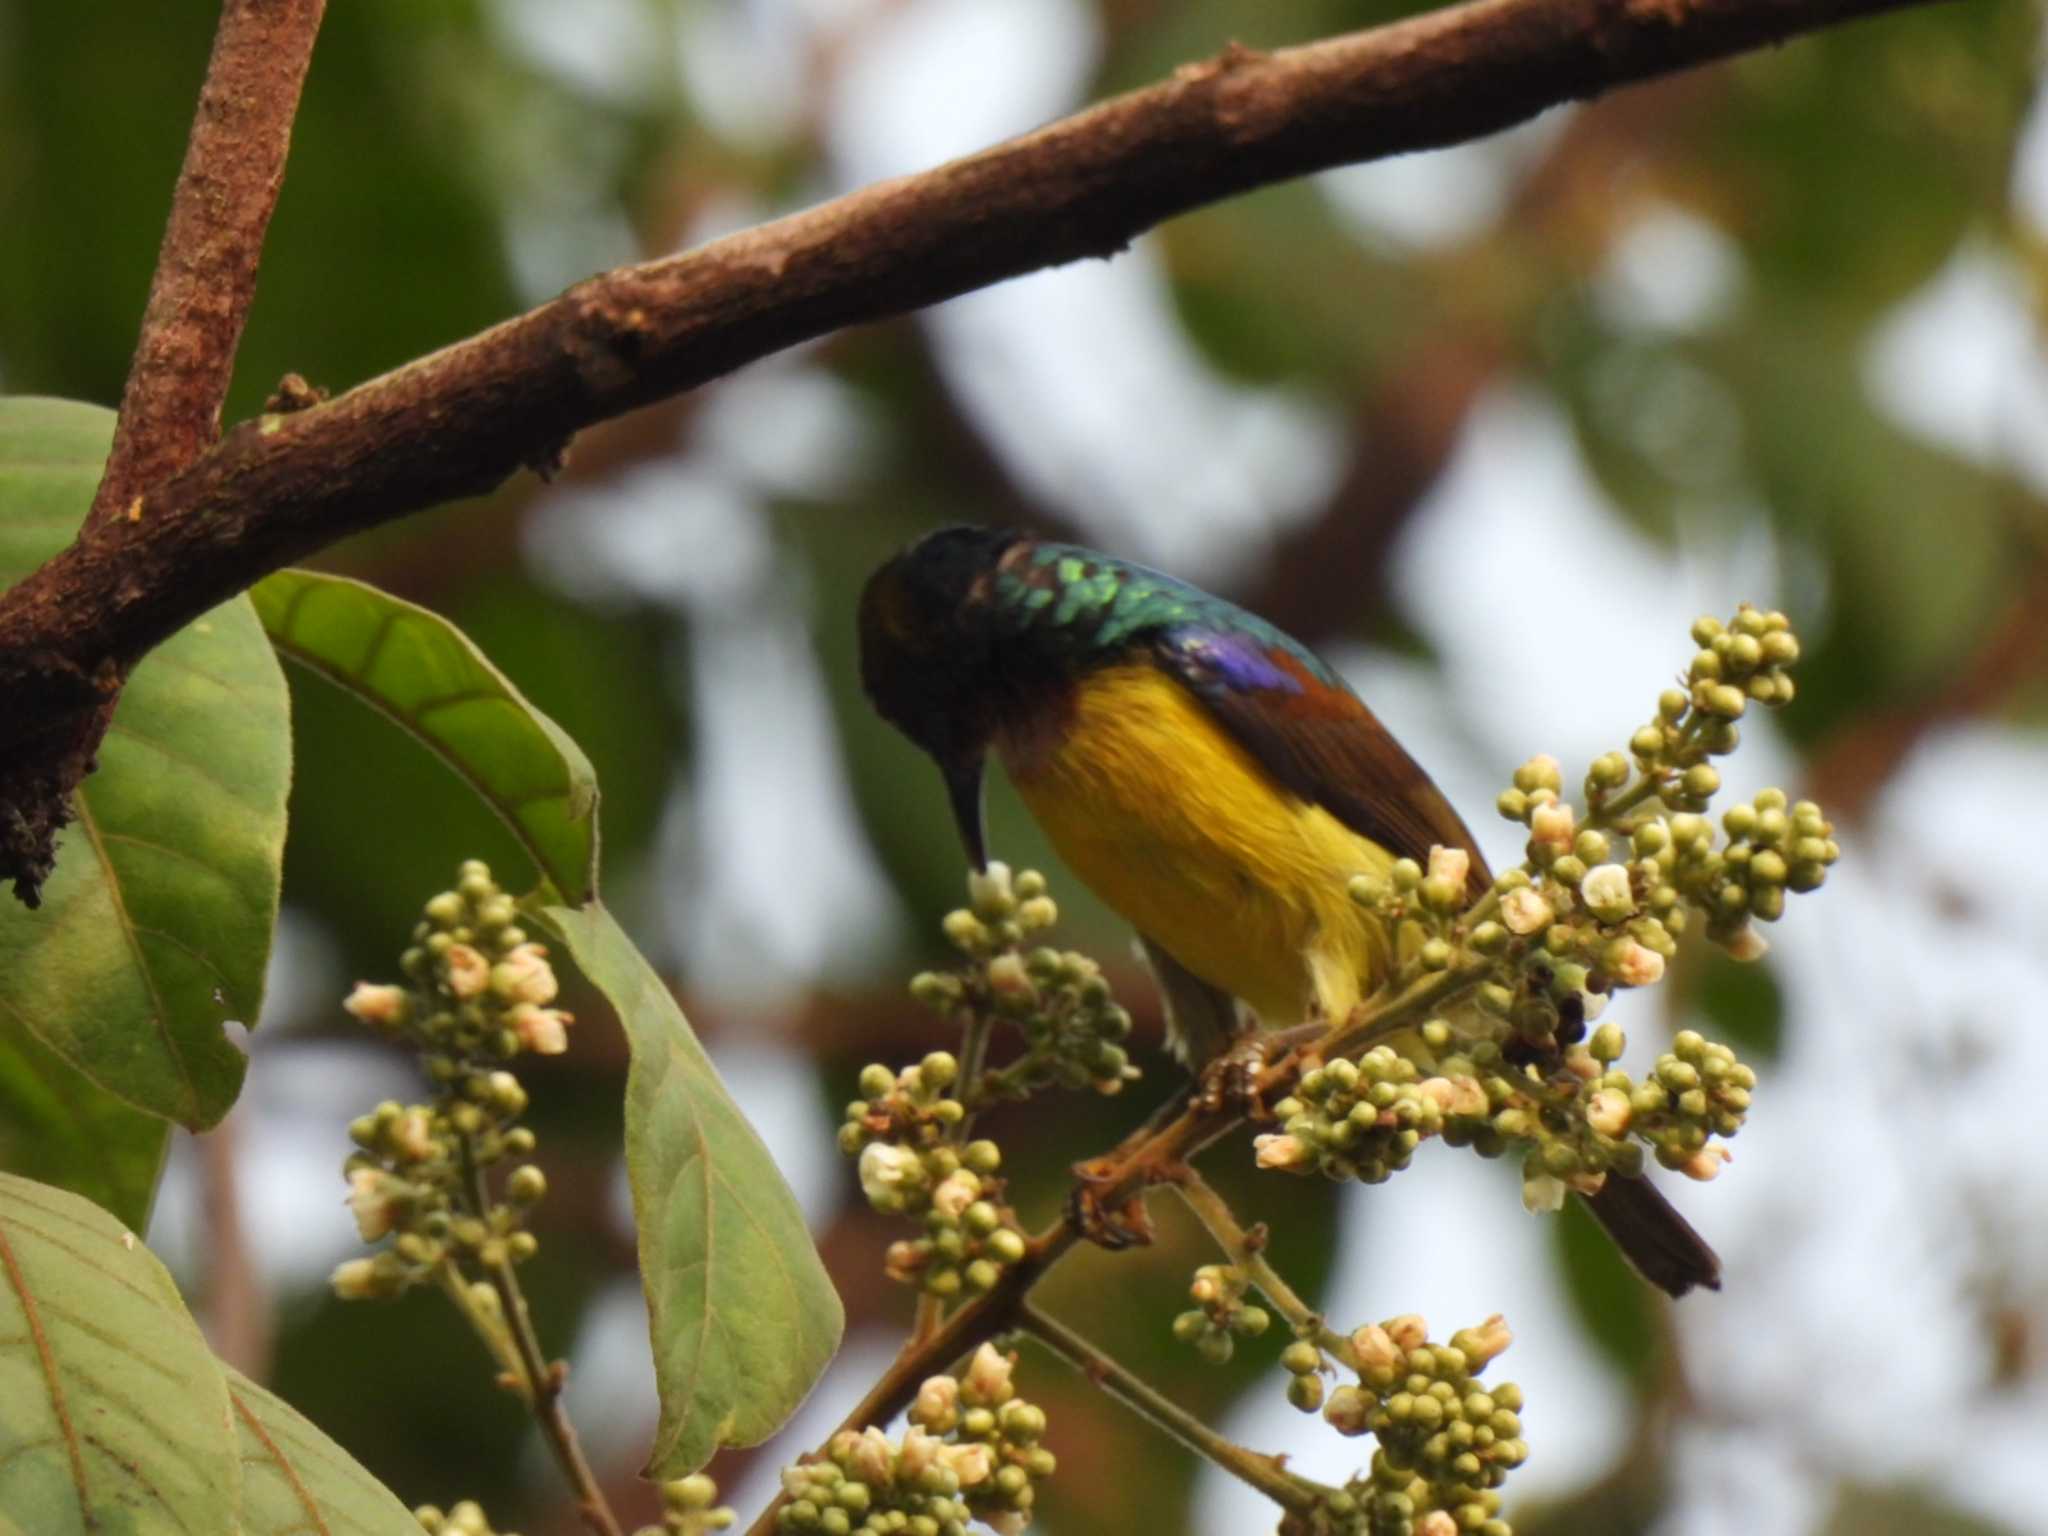 Photo of Brown-throated Sunbird at Khao Mai Keao Reservation Park by span265